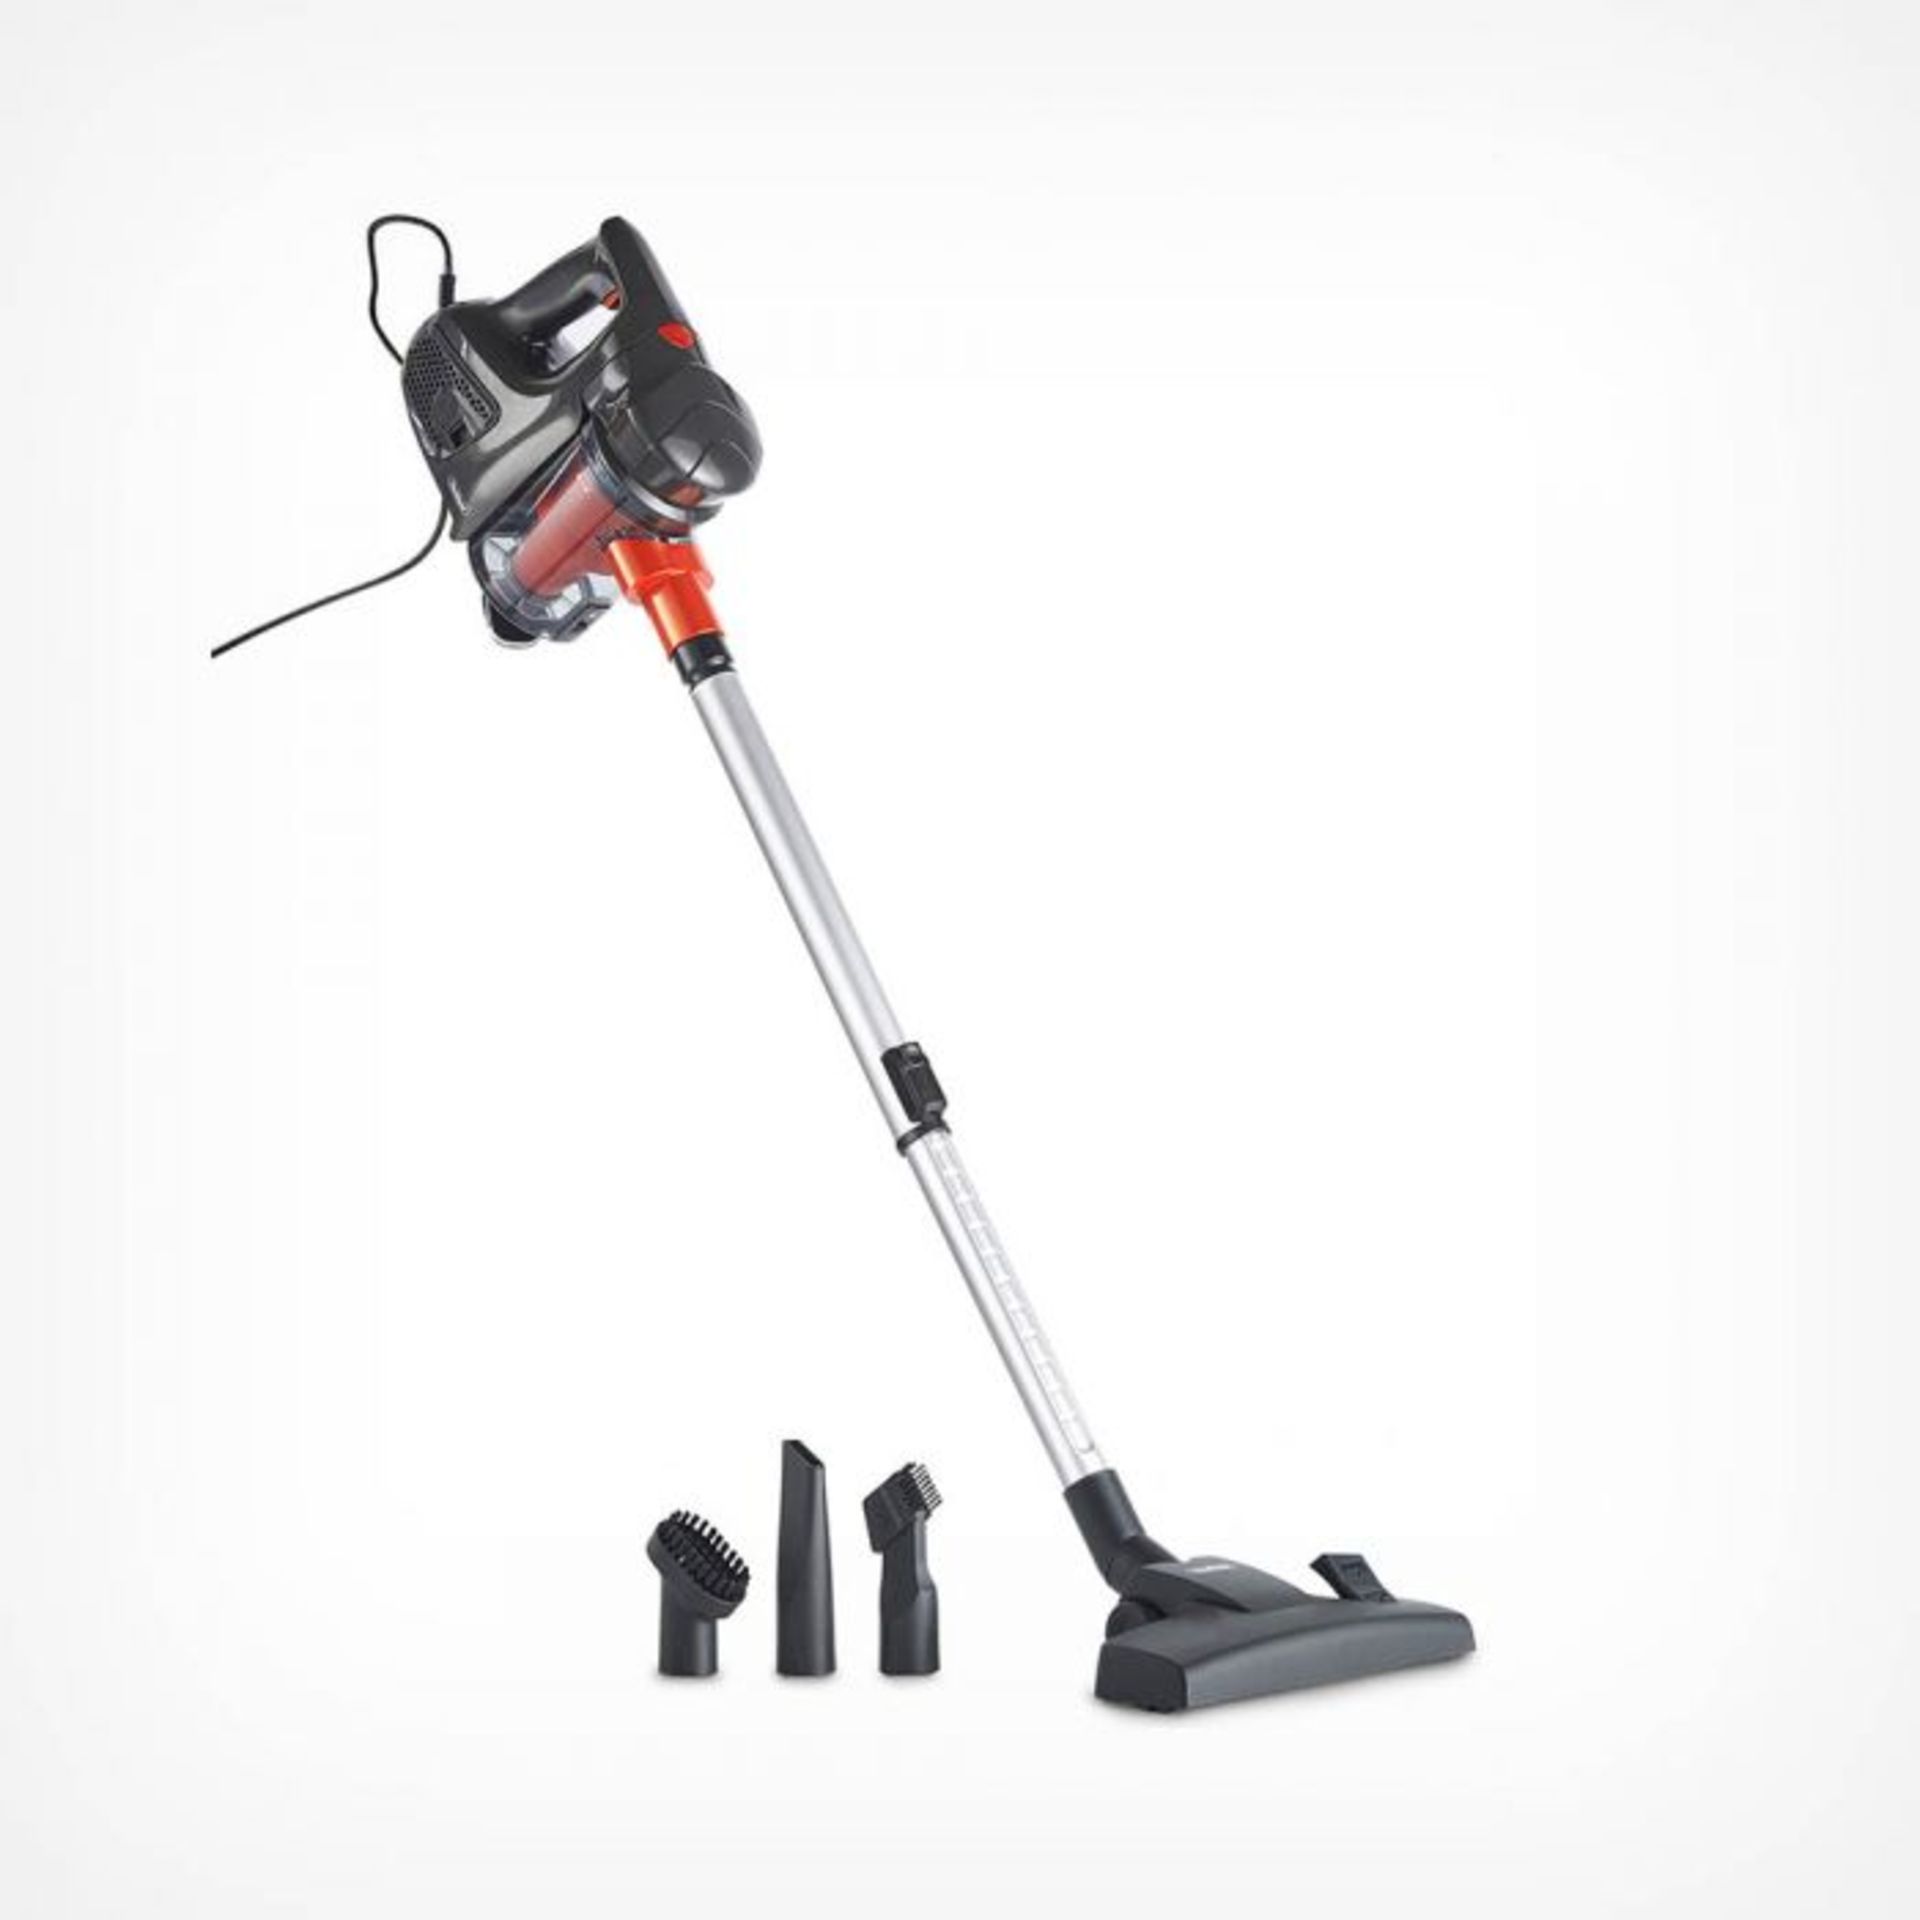 (V33) Corded Stick Vacuum Cleaner 600W Floor to ceiling cleaning power – effortlessly switch... - Image 2 of 6